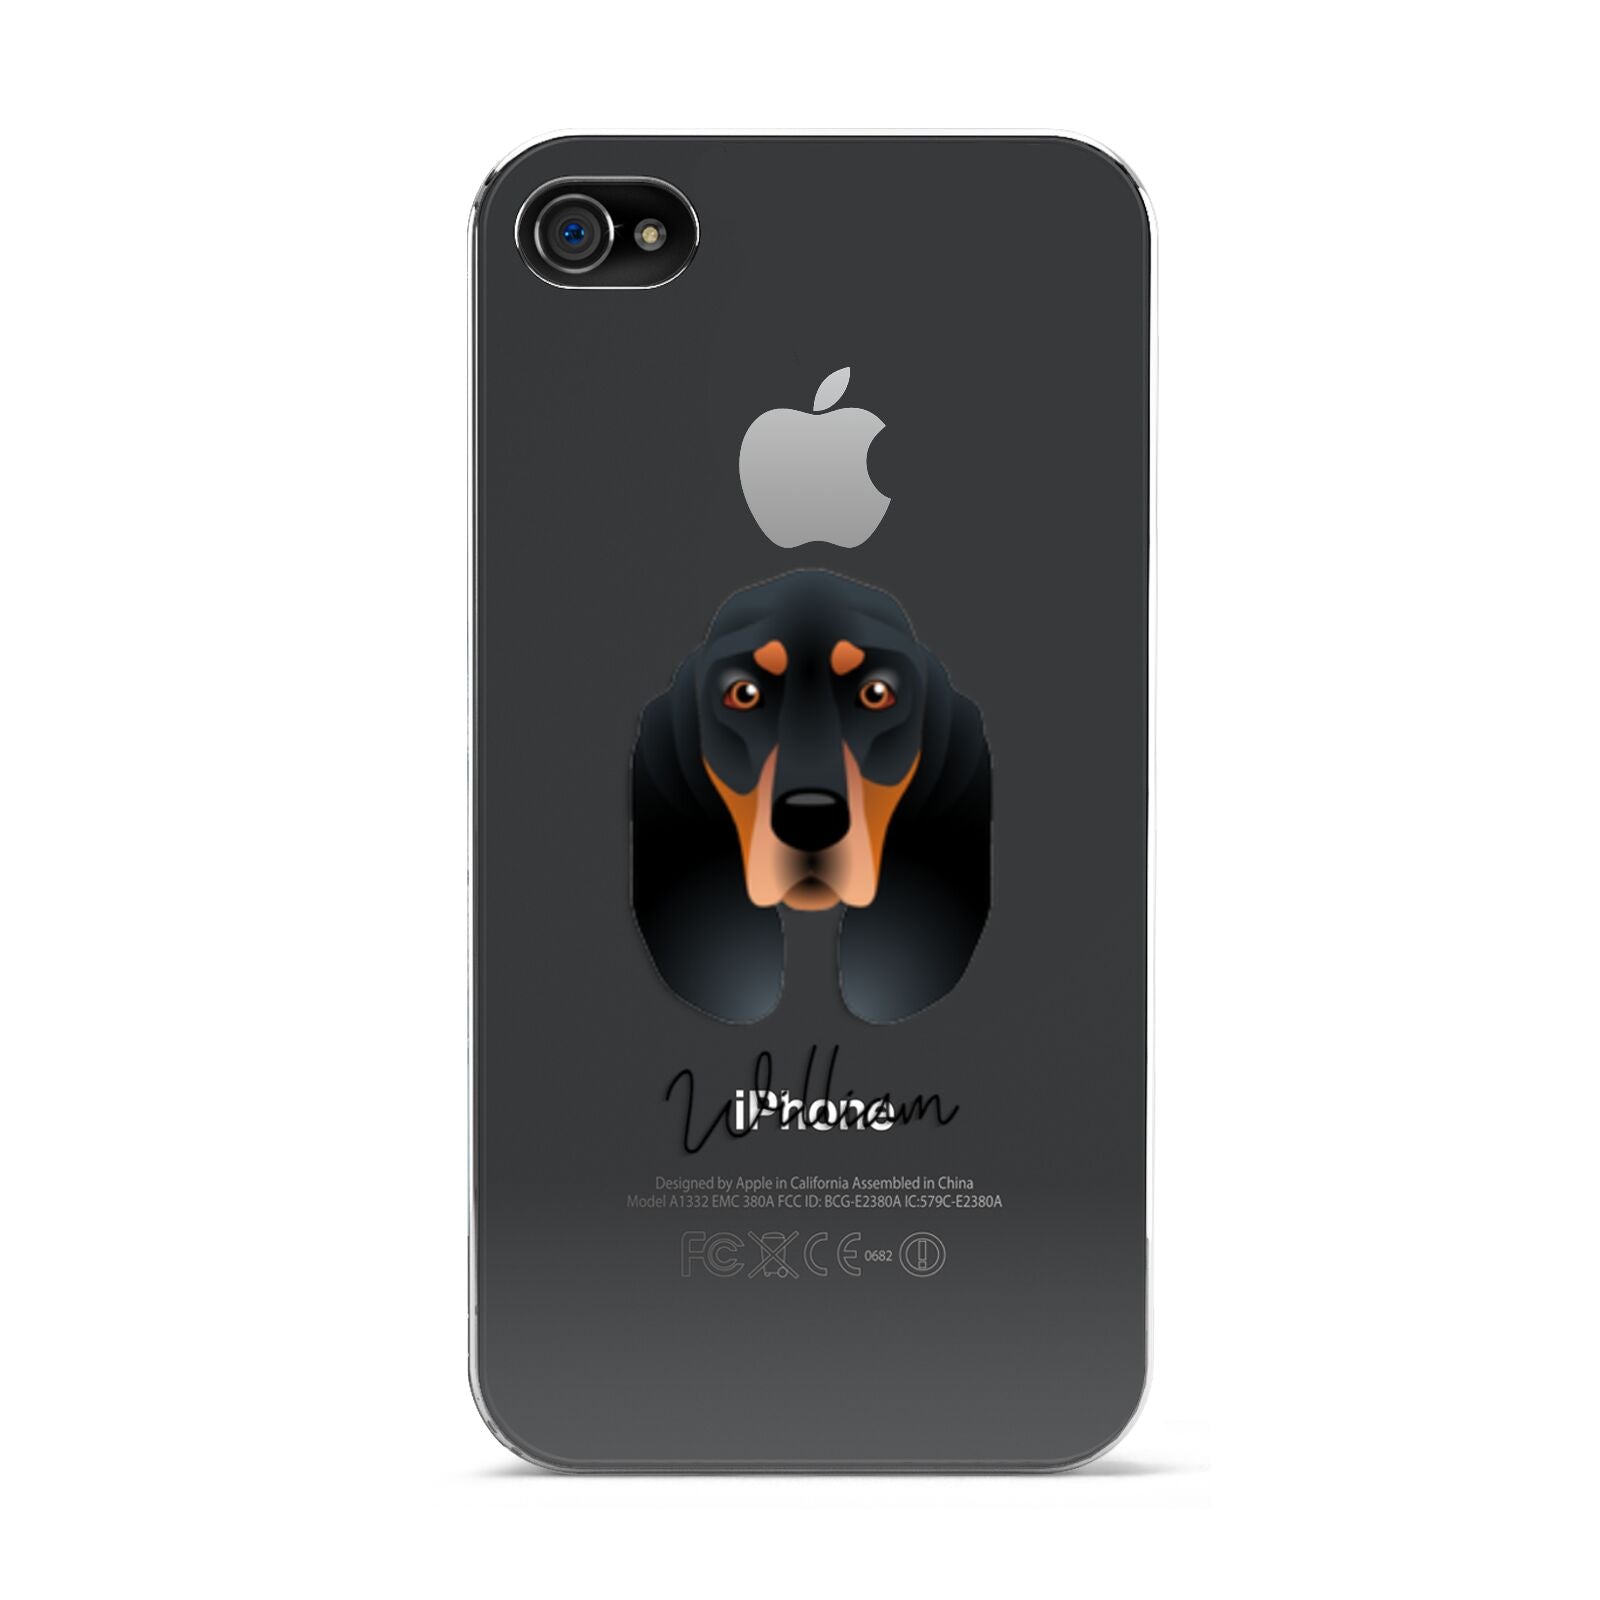 Black and Tan Coonhound Personalised Apple iPhone 4s Case